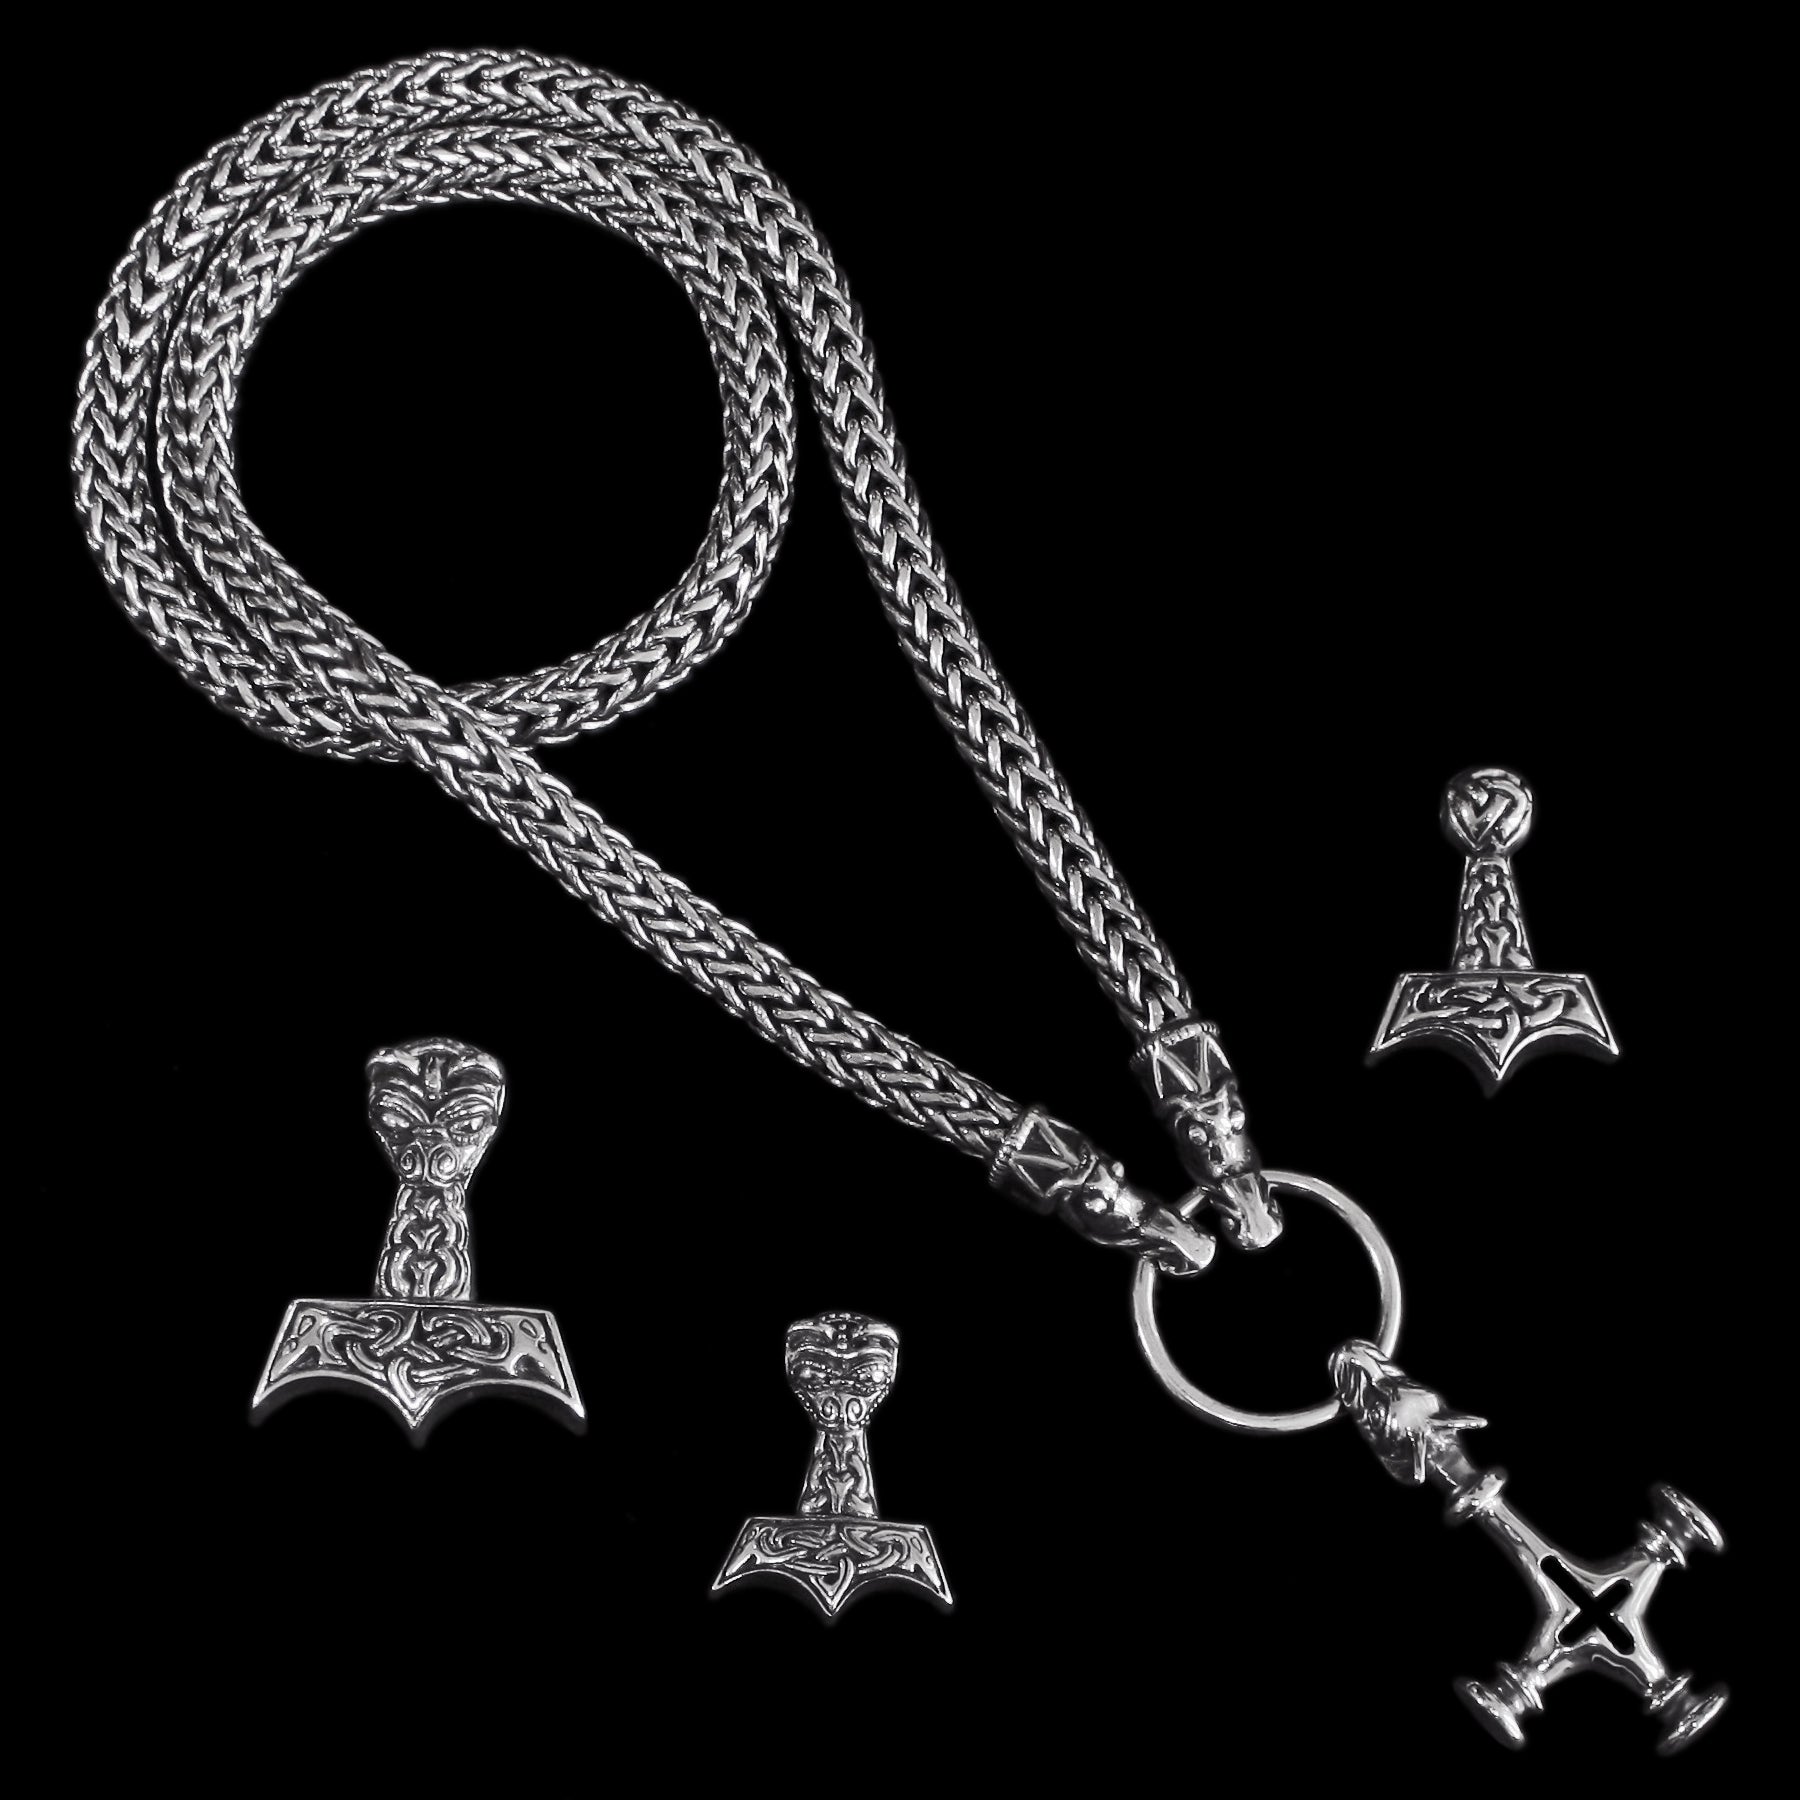 Fully Customisable 8mm Thick Silver Snake Chain Thor's Hammer Necklace with Gotland Dragon Heads with choice of Silver Thor's Hammers - Viking Jewelry